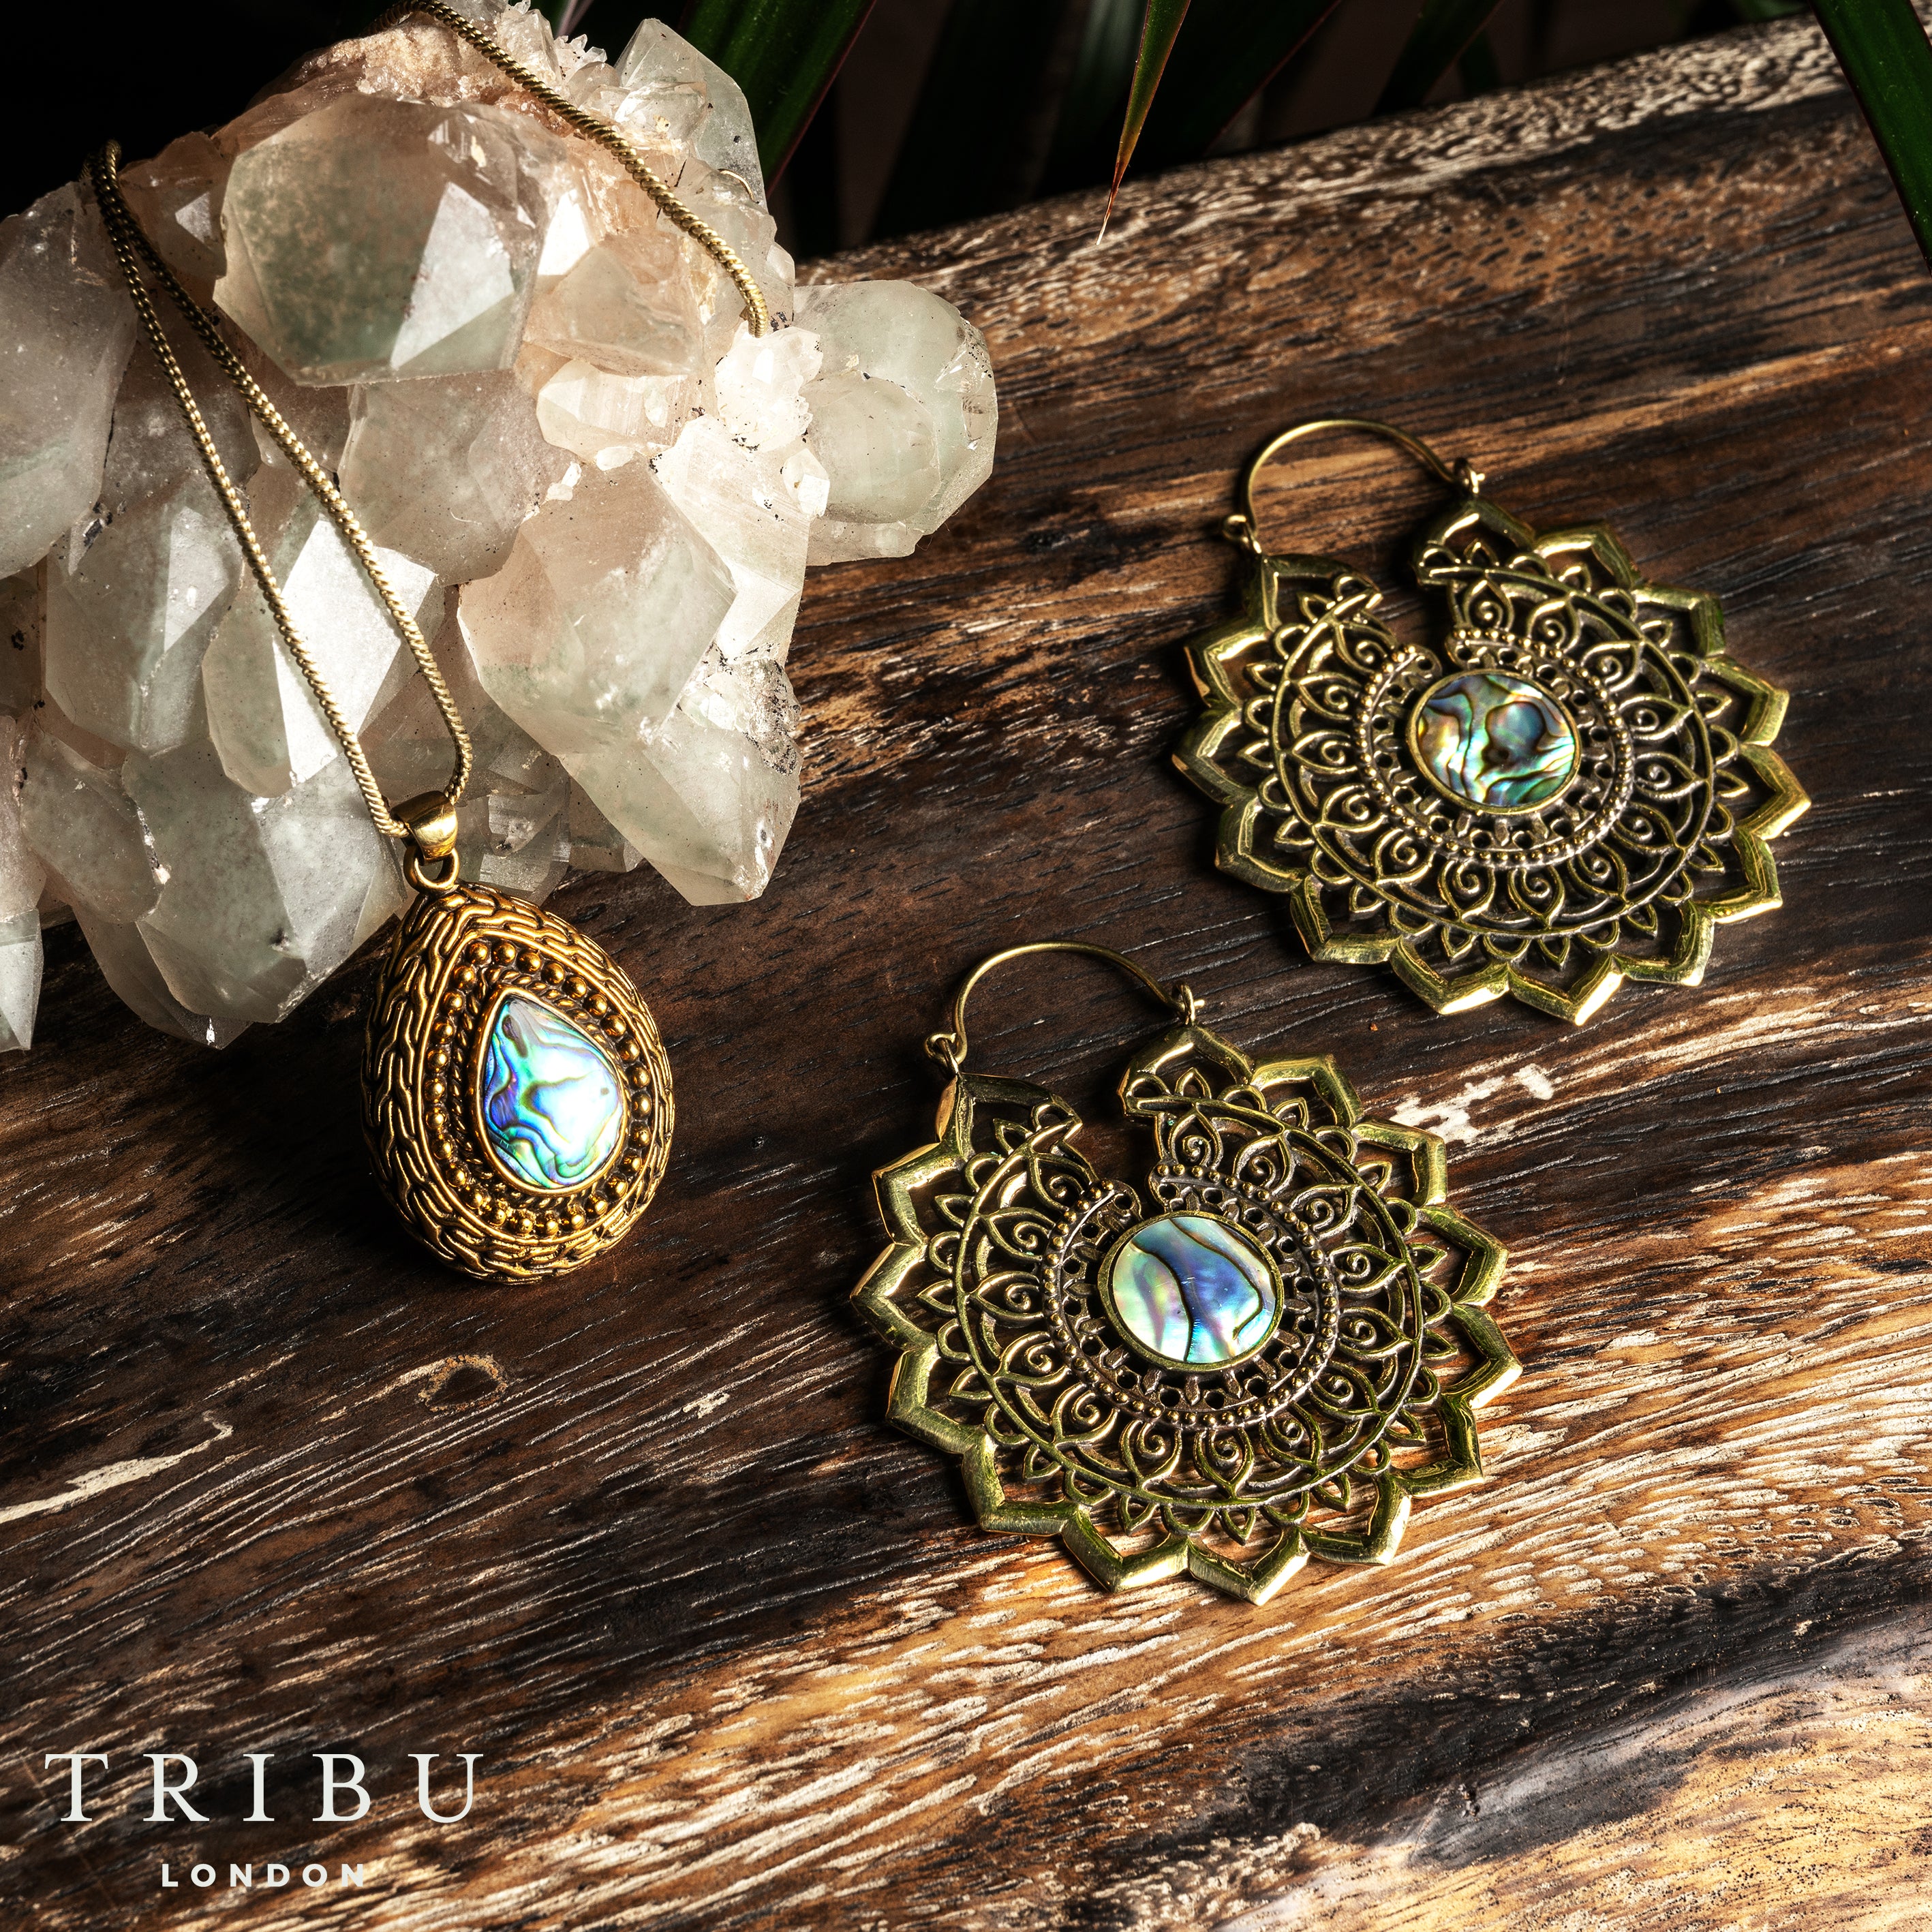 pair of golden brass large lotus open mandala earrings with centred abalone with a matching pendant on wood